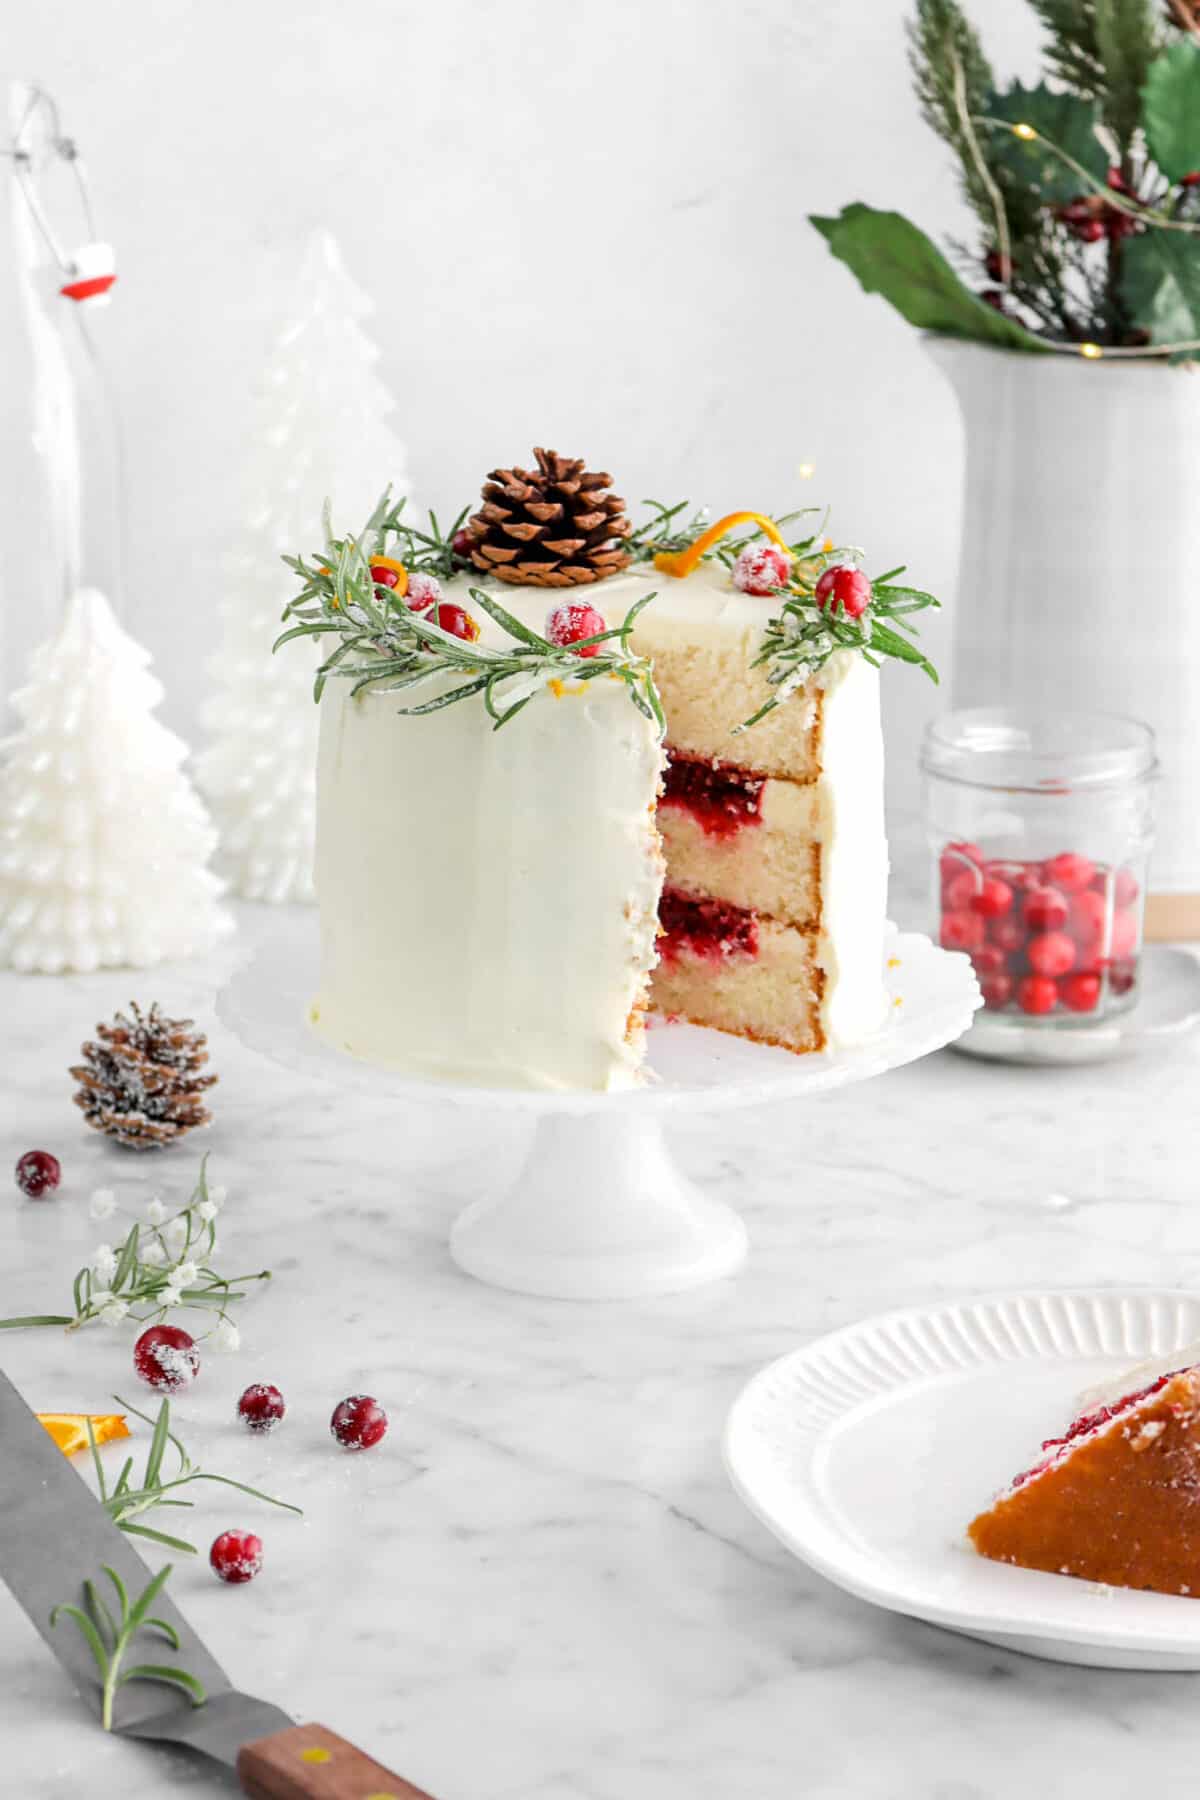 white cake on cake stand with offset spatula, cranberries, flowers, and pine cone beside, cake slice on white plate , with jar of cranberries and white christmas trees behind